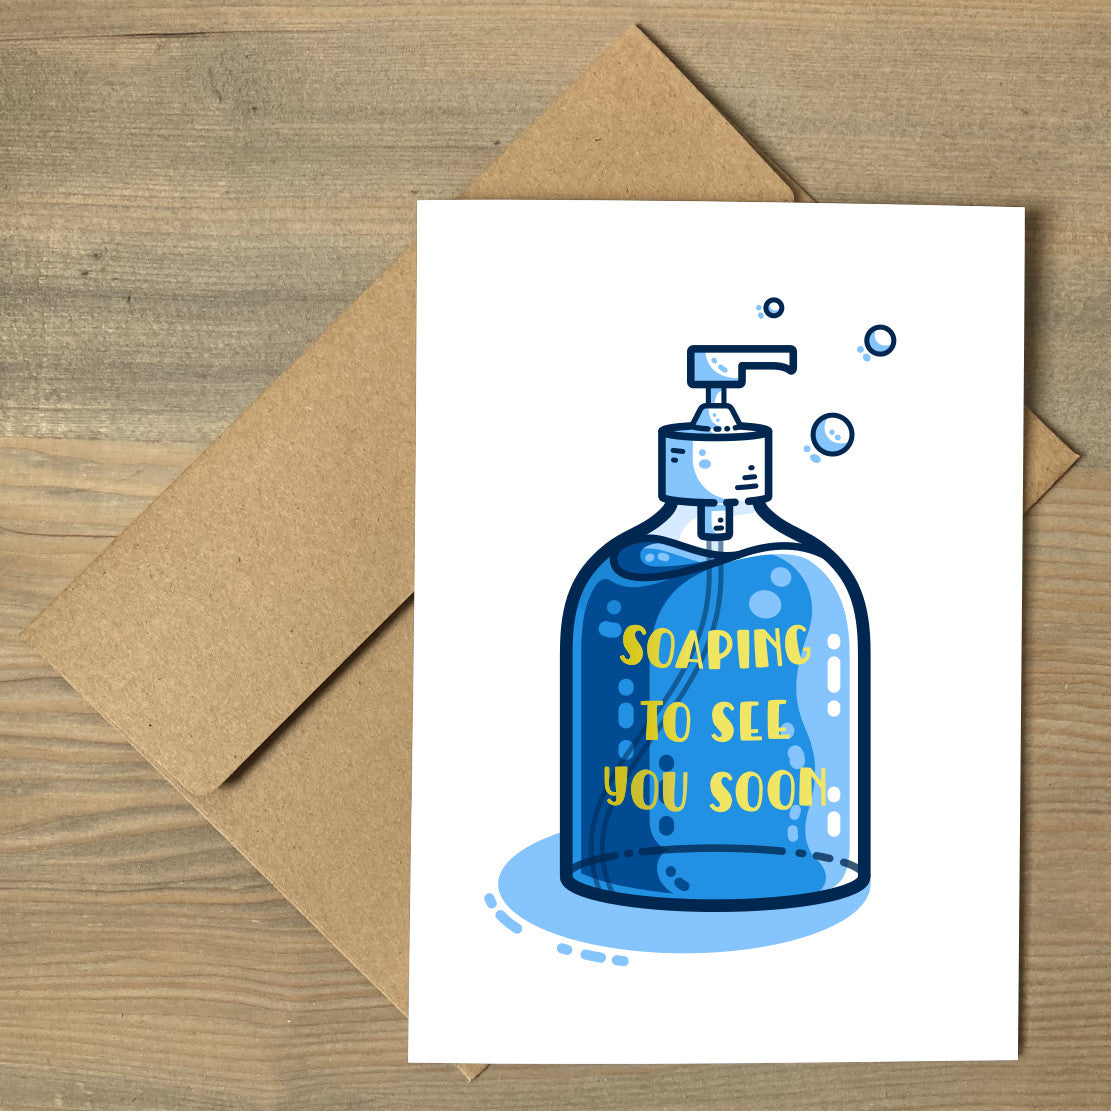 A white card lying flat on a brown envelope. The card has a picture of a bottle of blue liquid soap on it and the yellow words on the bottle say soaping to see you soon.